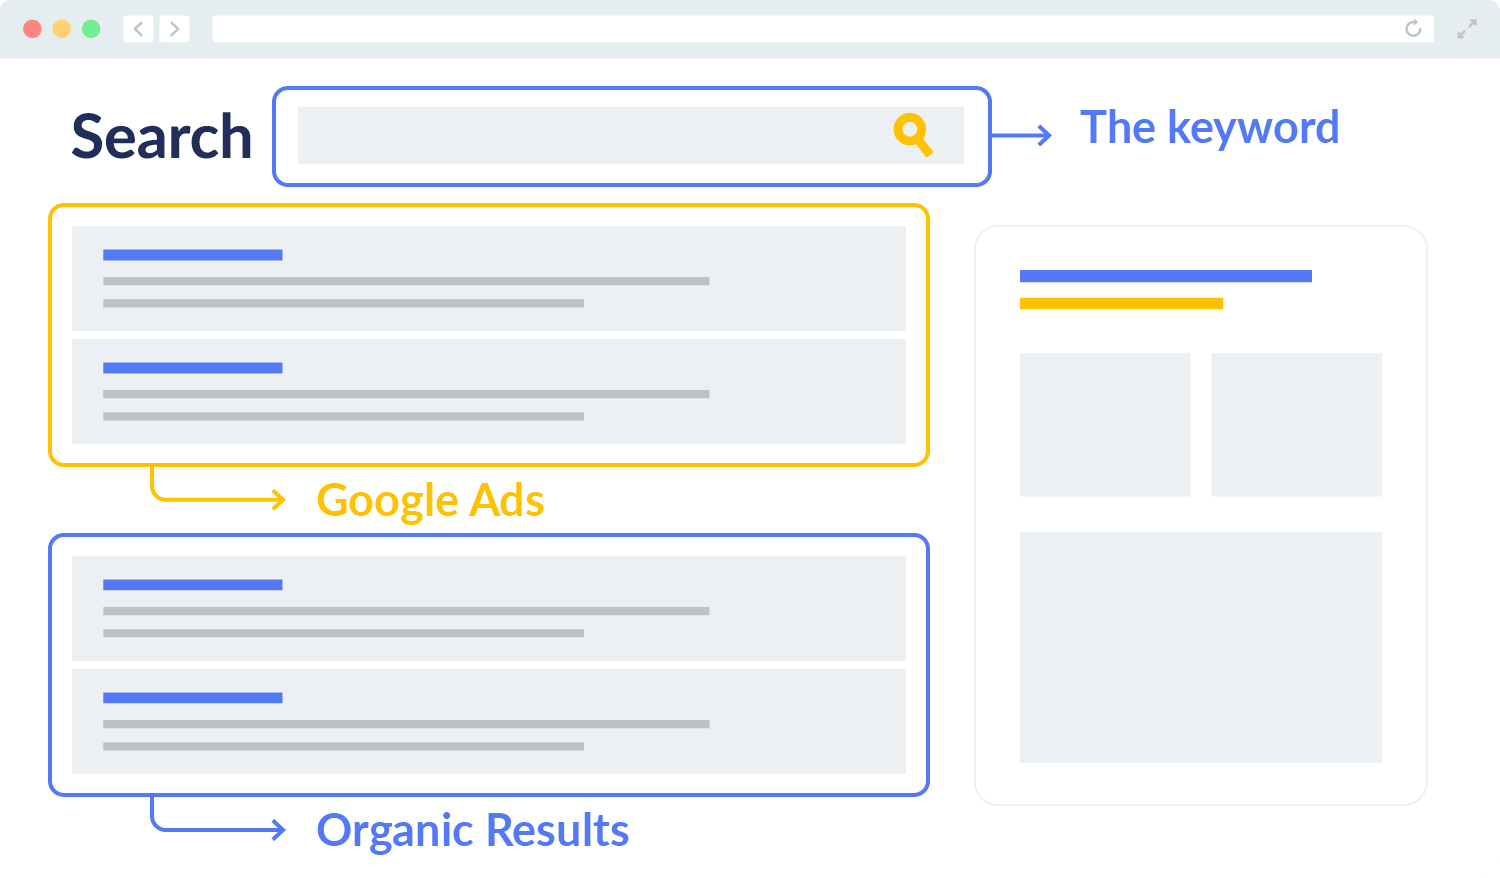 An illustration of a SERP that shows how Google Ads appear above the results for organic nonprofit content